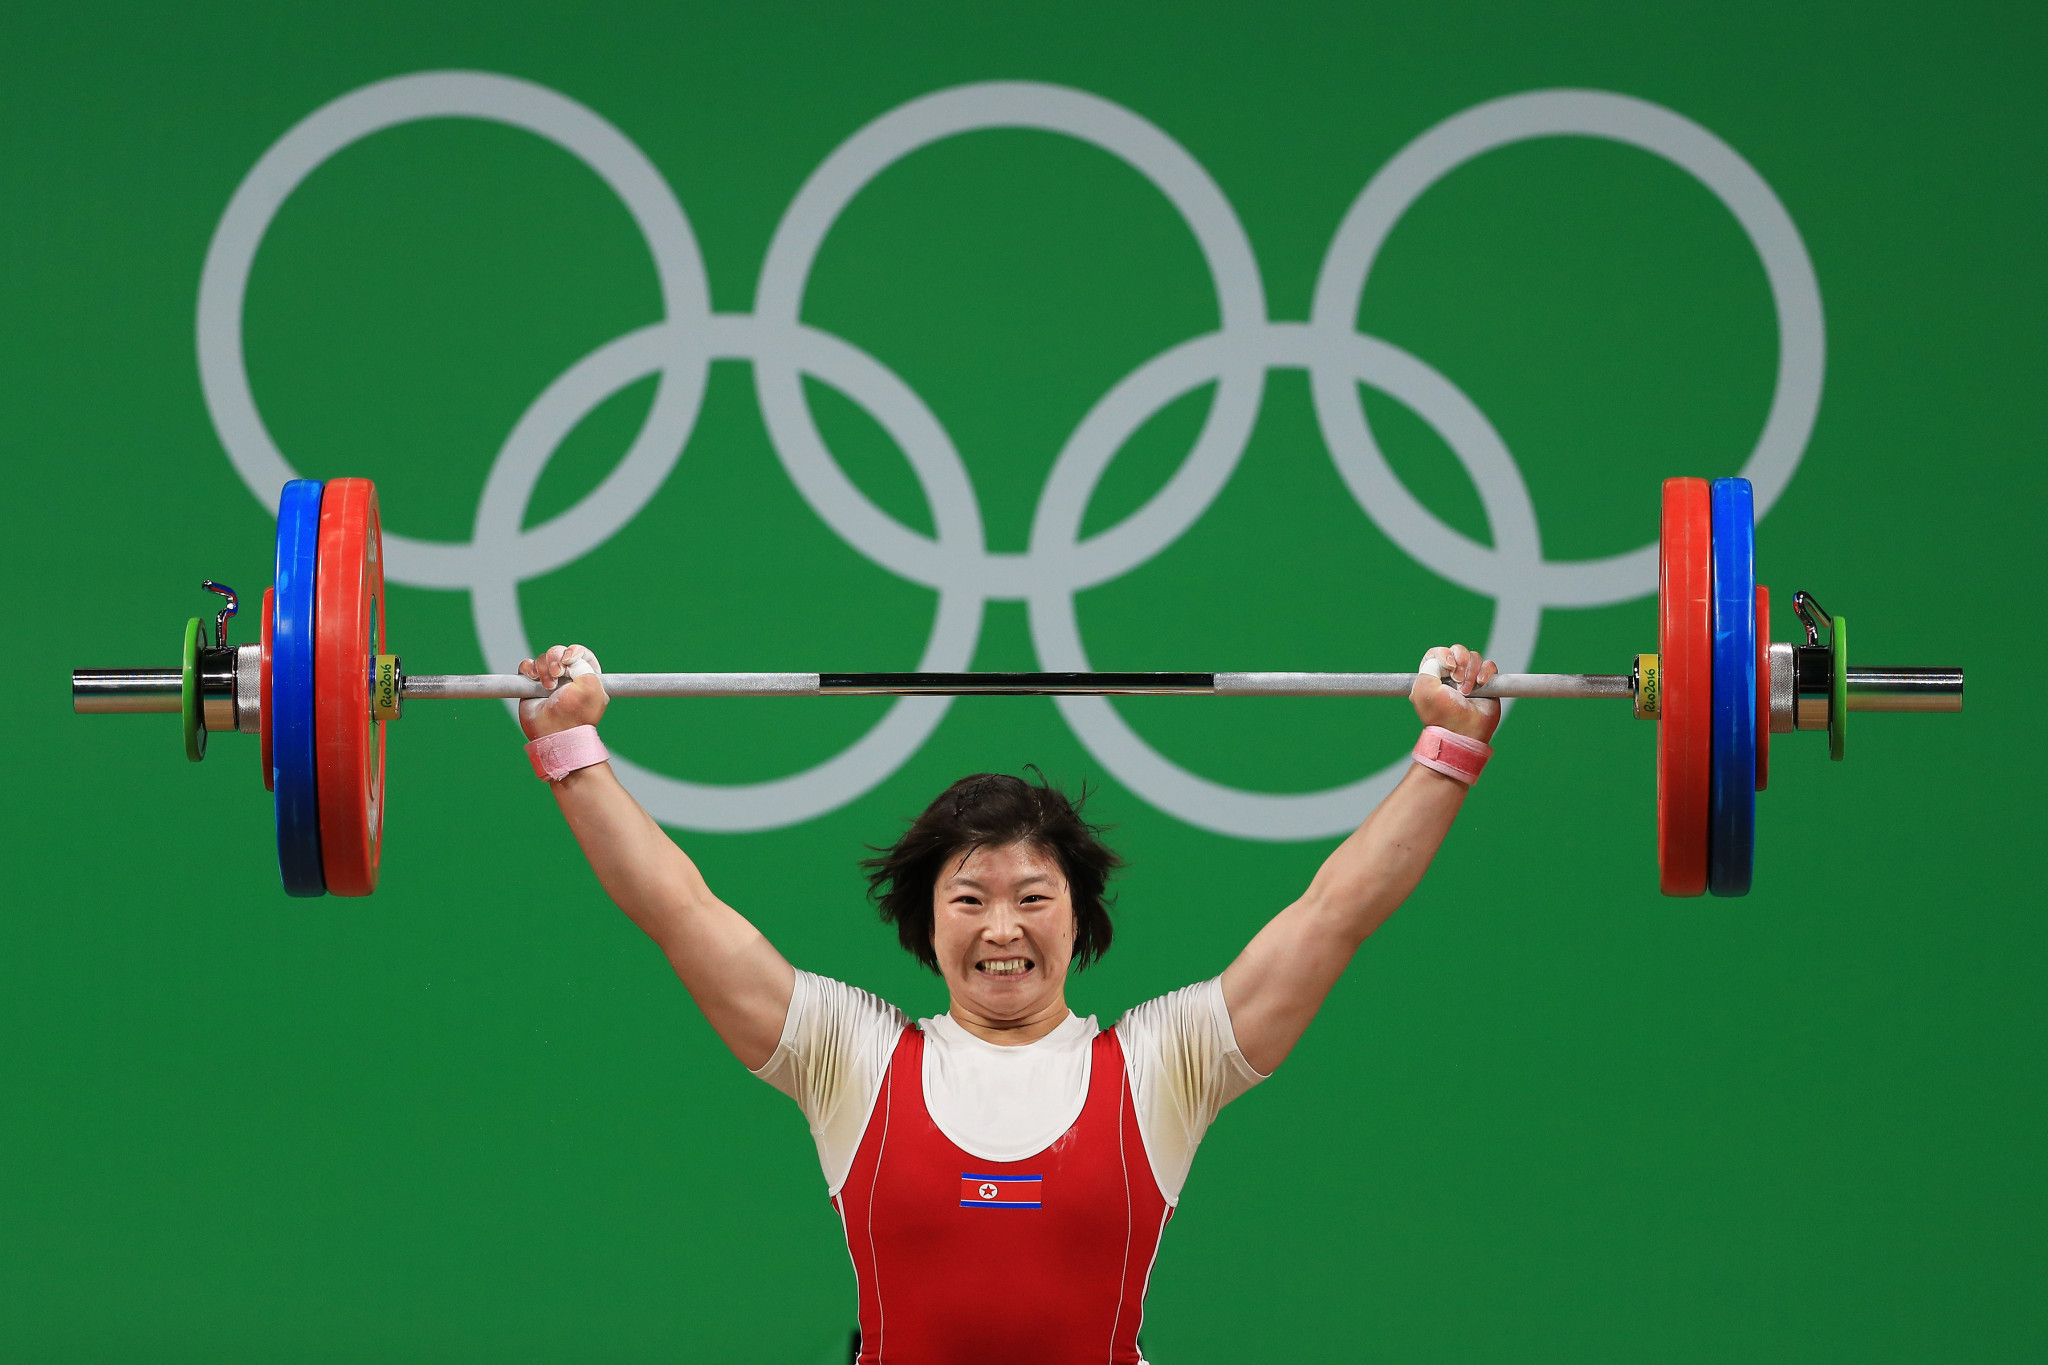 North Korea's last appearance in the Summer Olympics was at Rio 2016, where Rim Jong-sim won the country's fifth gold medal in weightlifting ©Getty Images